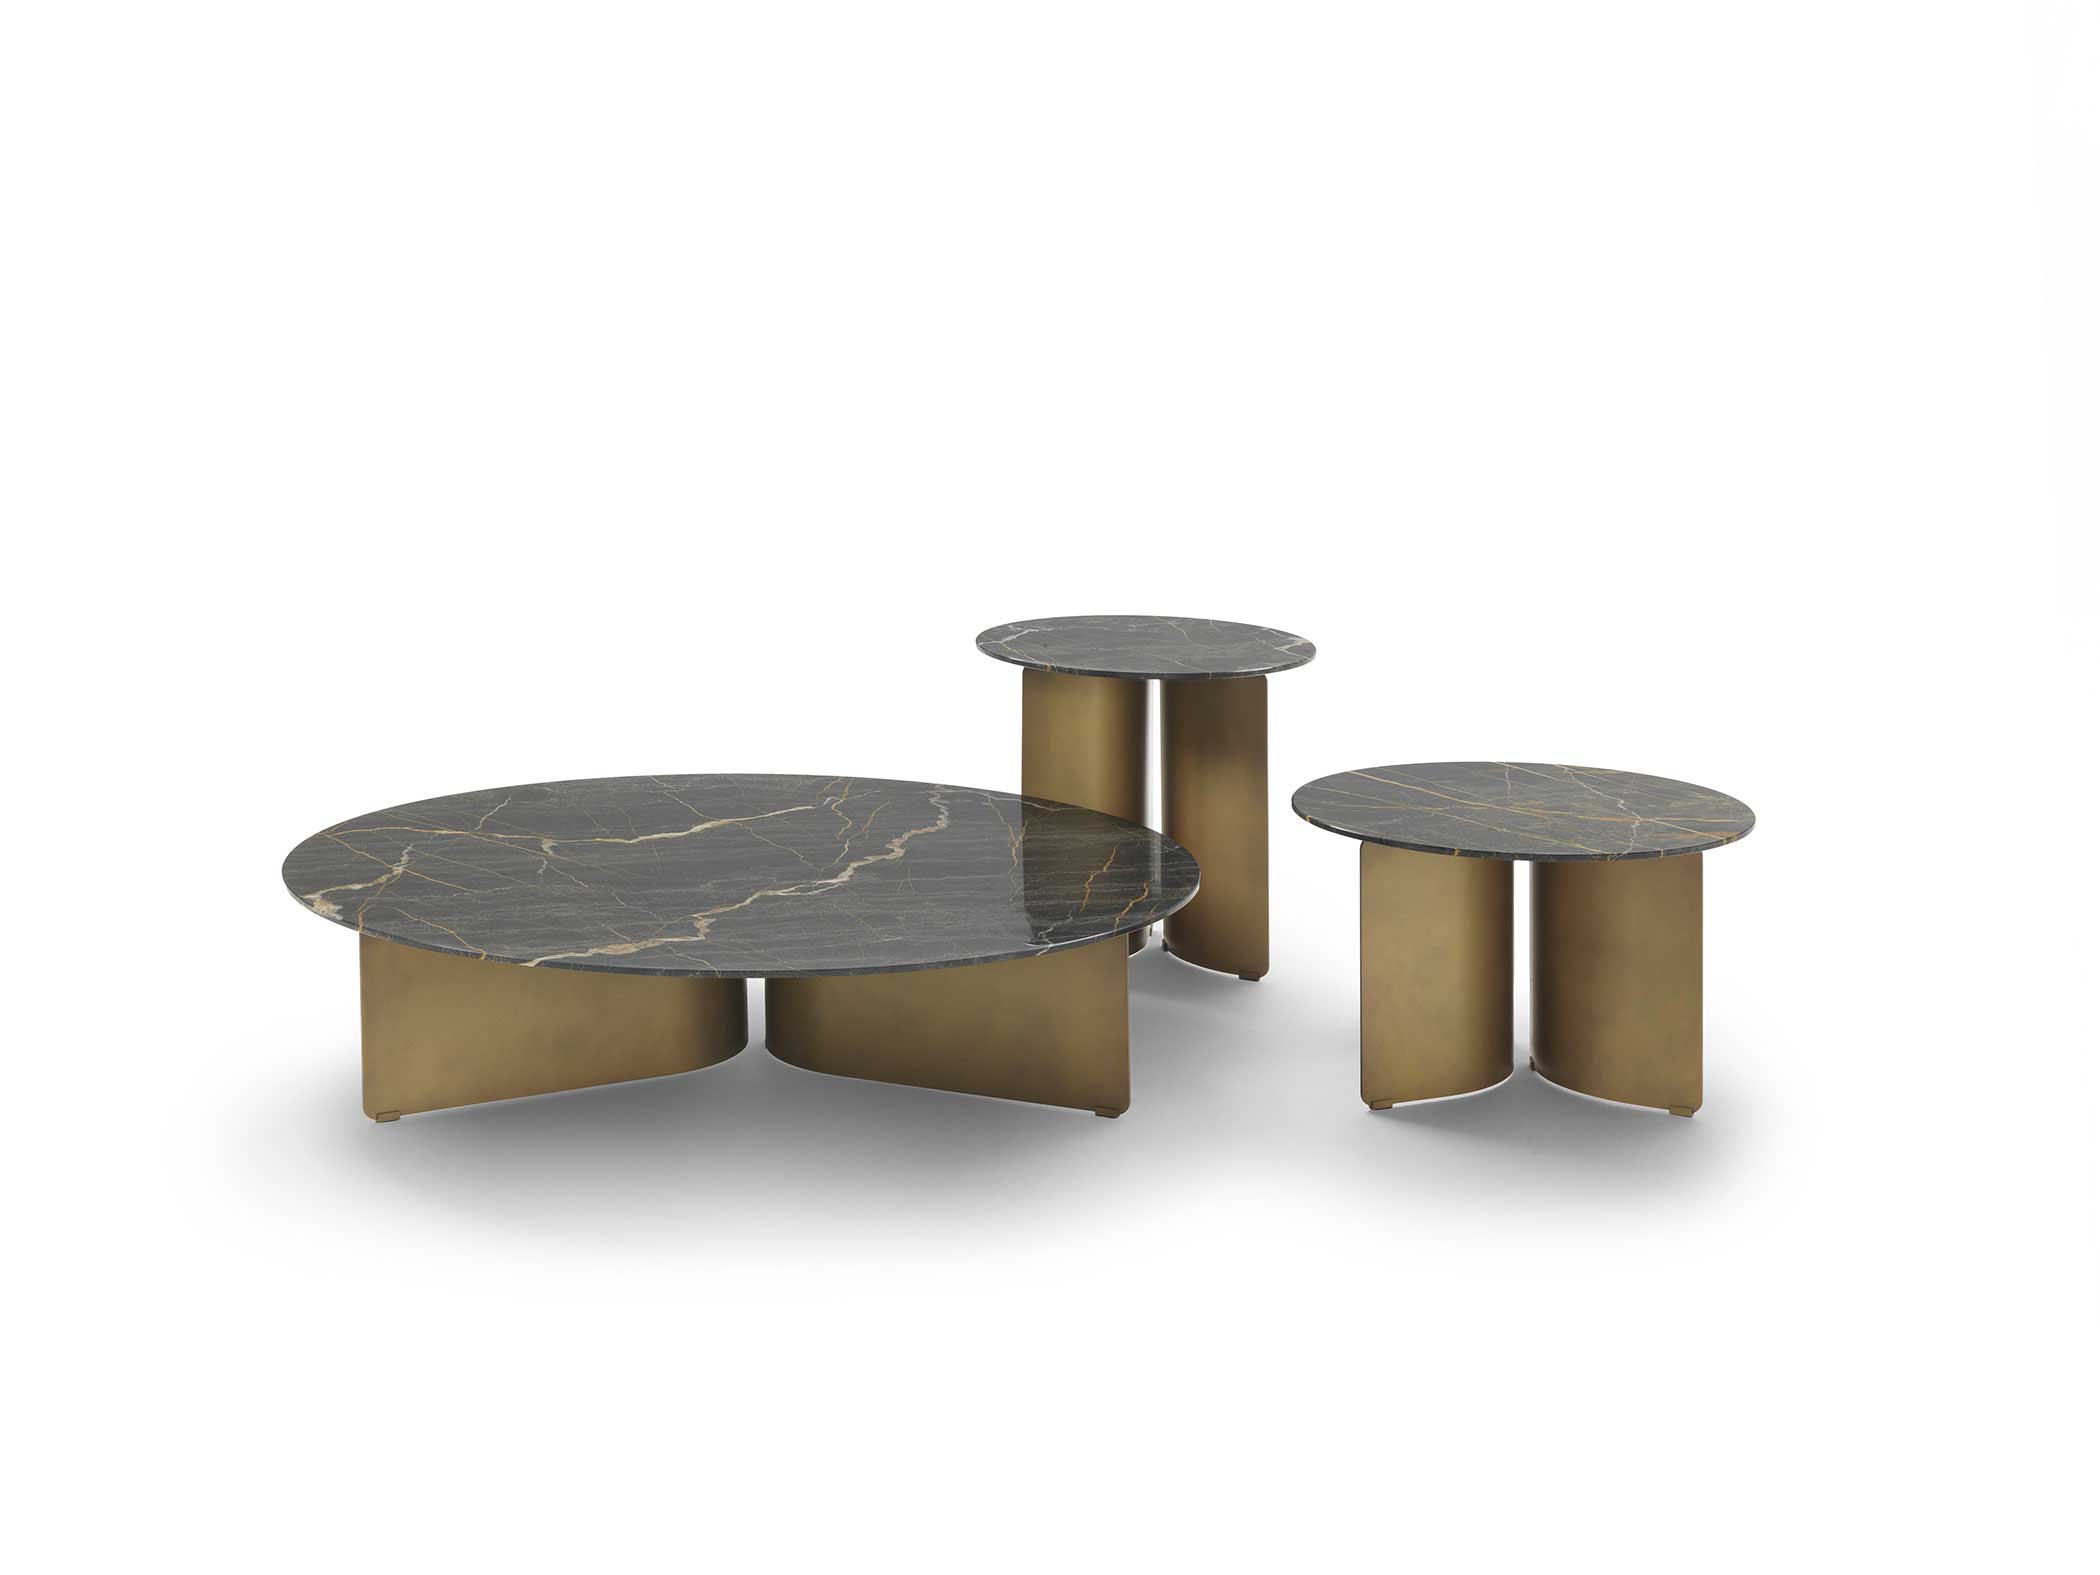 Img050 Wave Coffee Tables D50x47 D120x27 D60x37OPM20 OPP17